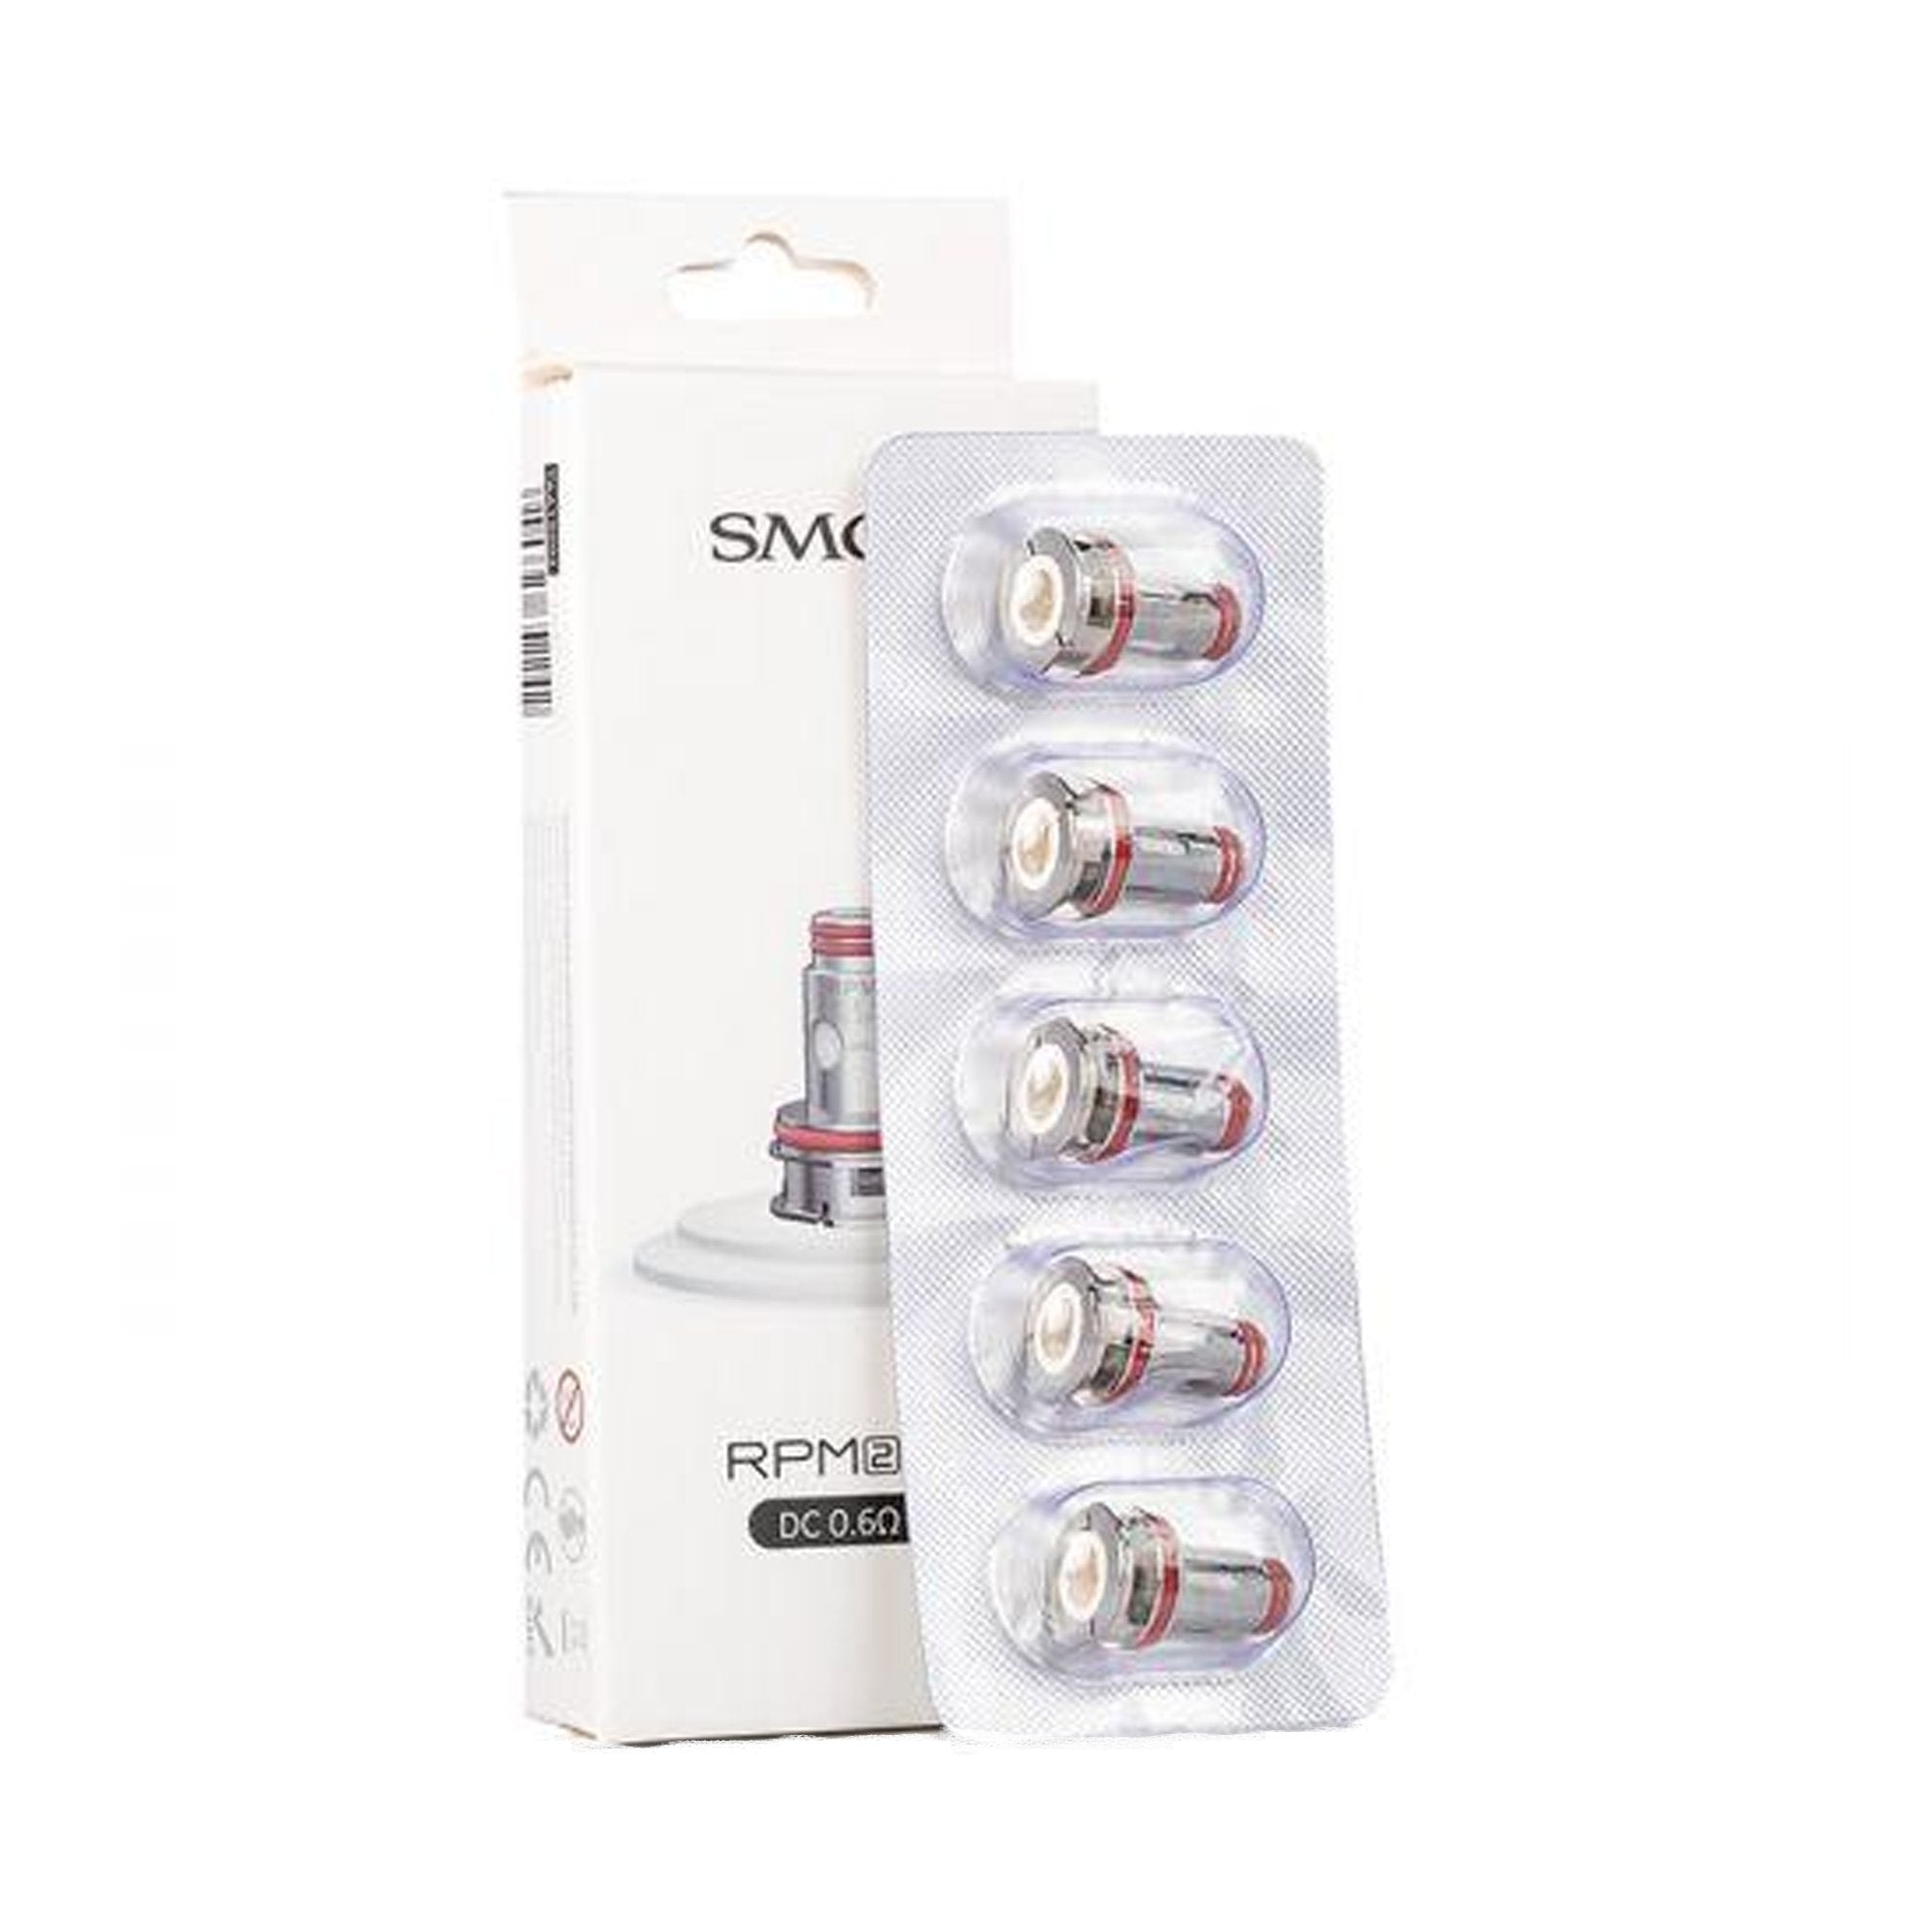 Genuine SMOK RPM2 Mesh Coils | 5 Pack | Wolfvapes - Wolfvapes.co.uk-0.6OHM DC MTL COIL